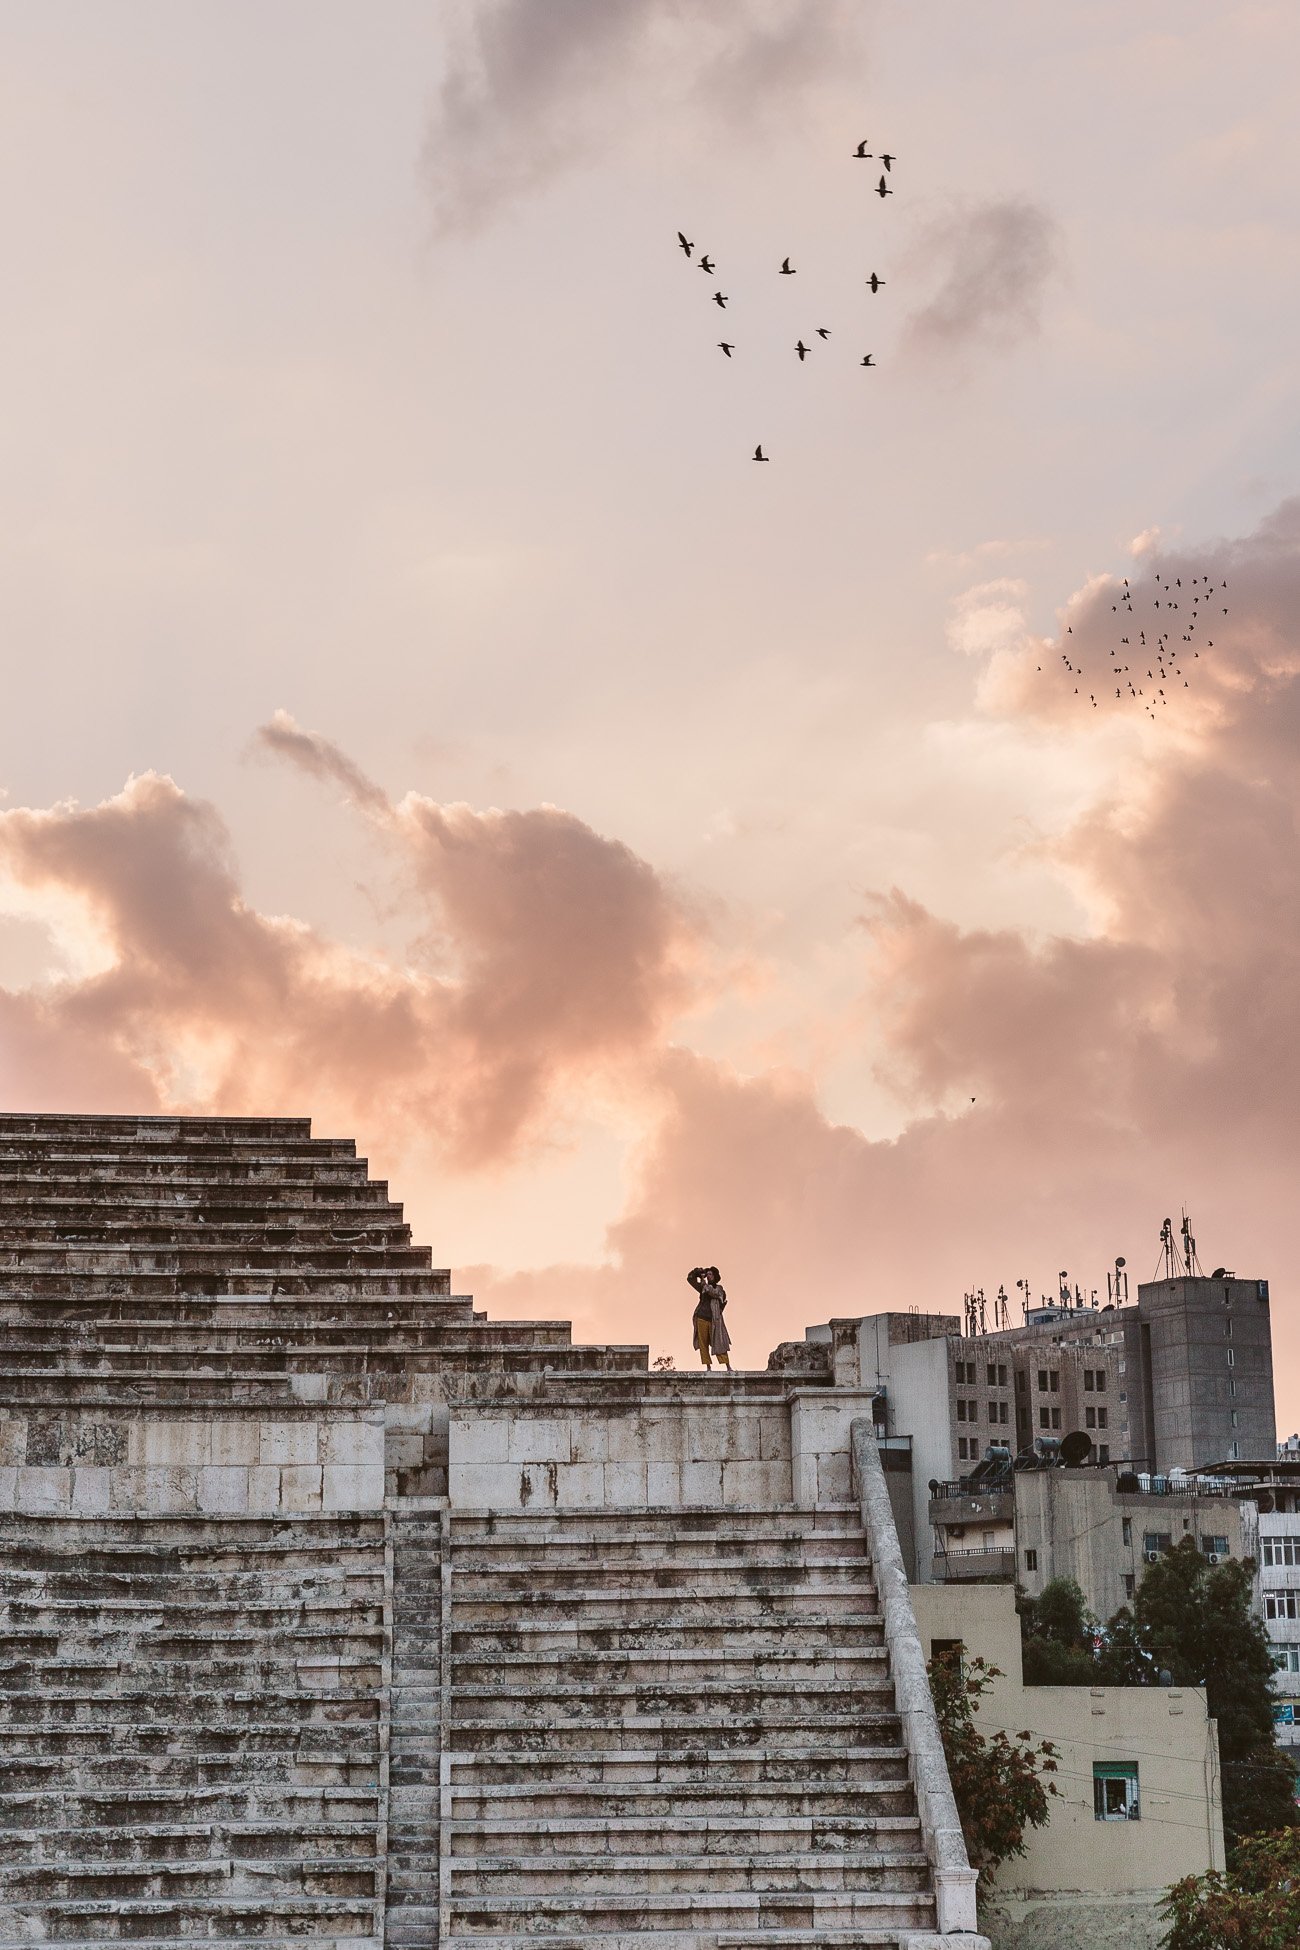 Watch the sunset at the Roman Theatre in Amman during 24 hours in Amman